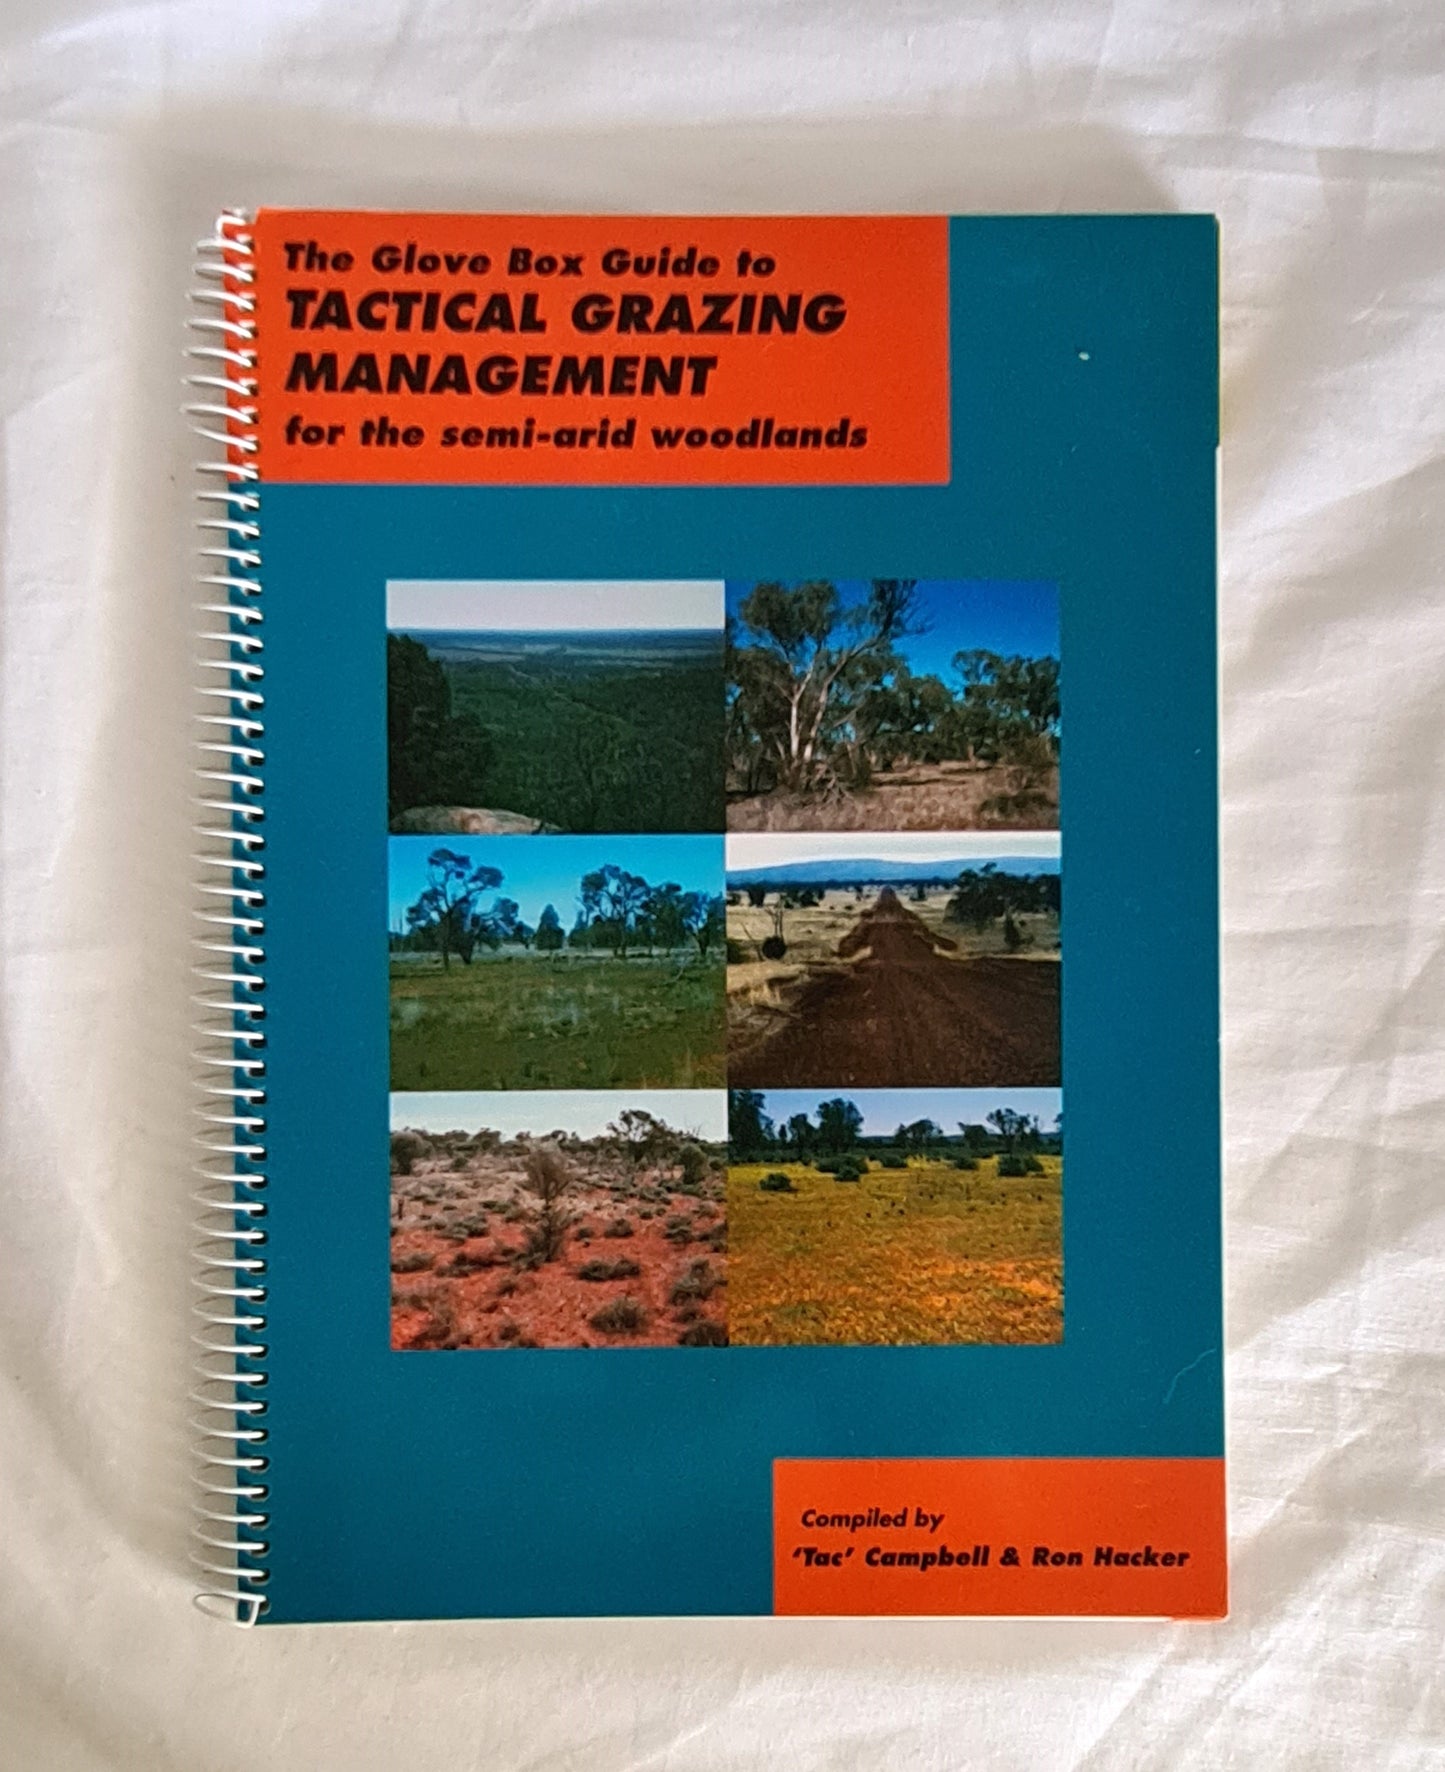 The Glove Box Guide to Tactical Grazing Management for the semi-arid woodlands  by ‘Tac’ Campbell and Ron Hacker  edited by Bill Noad